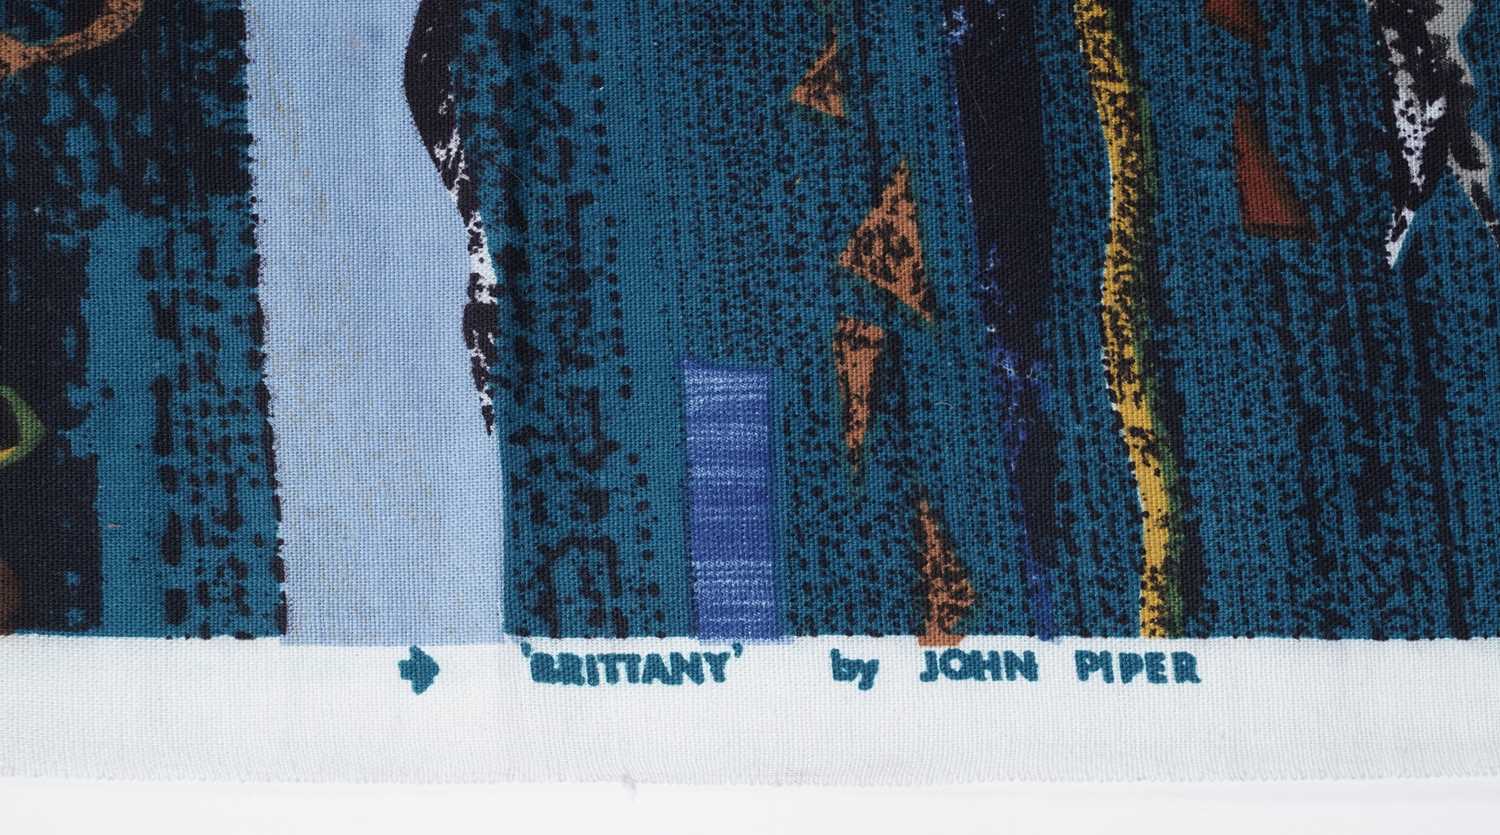 John Piper - Brittany | screen print on cotton - Image 4 of 7